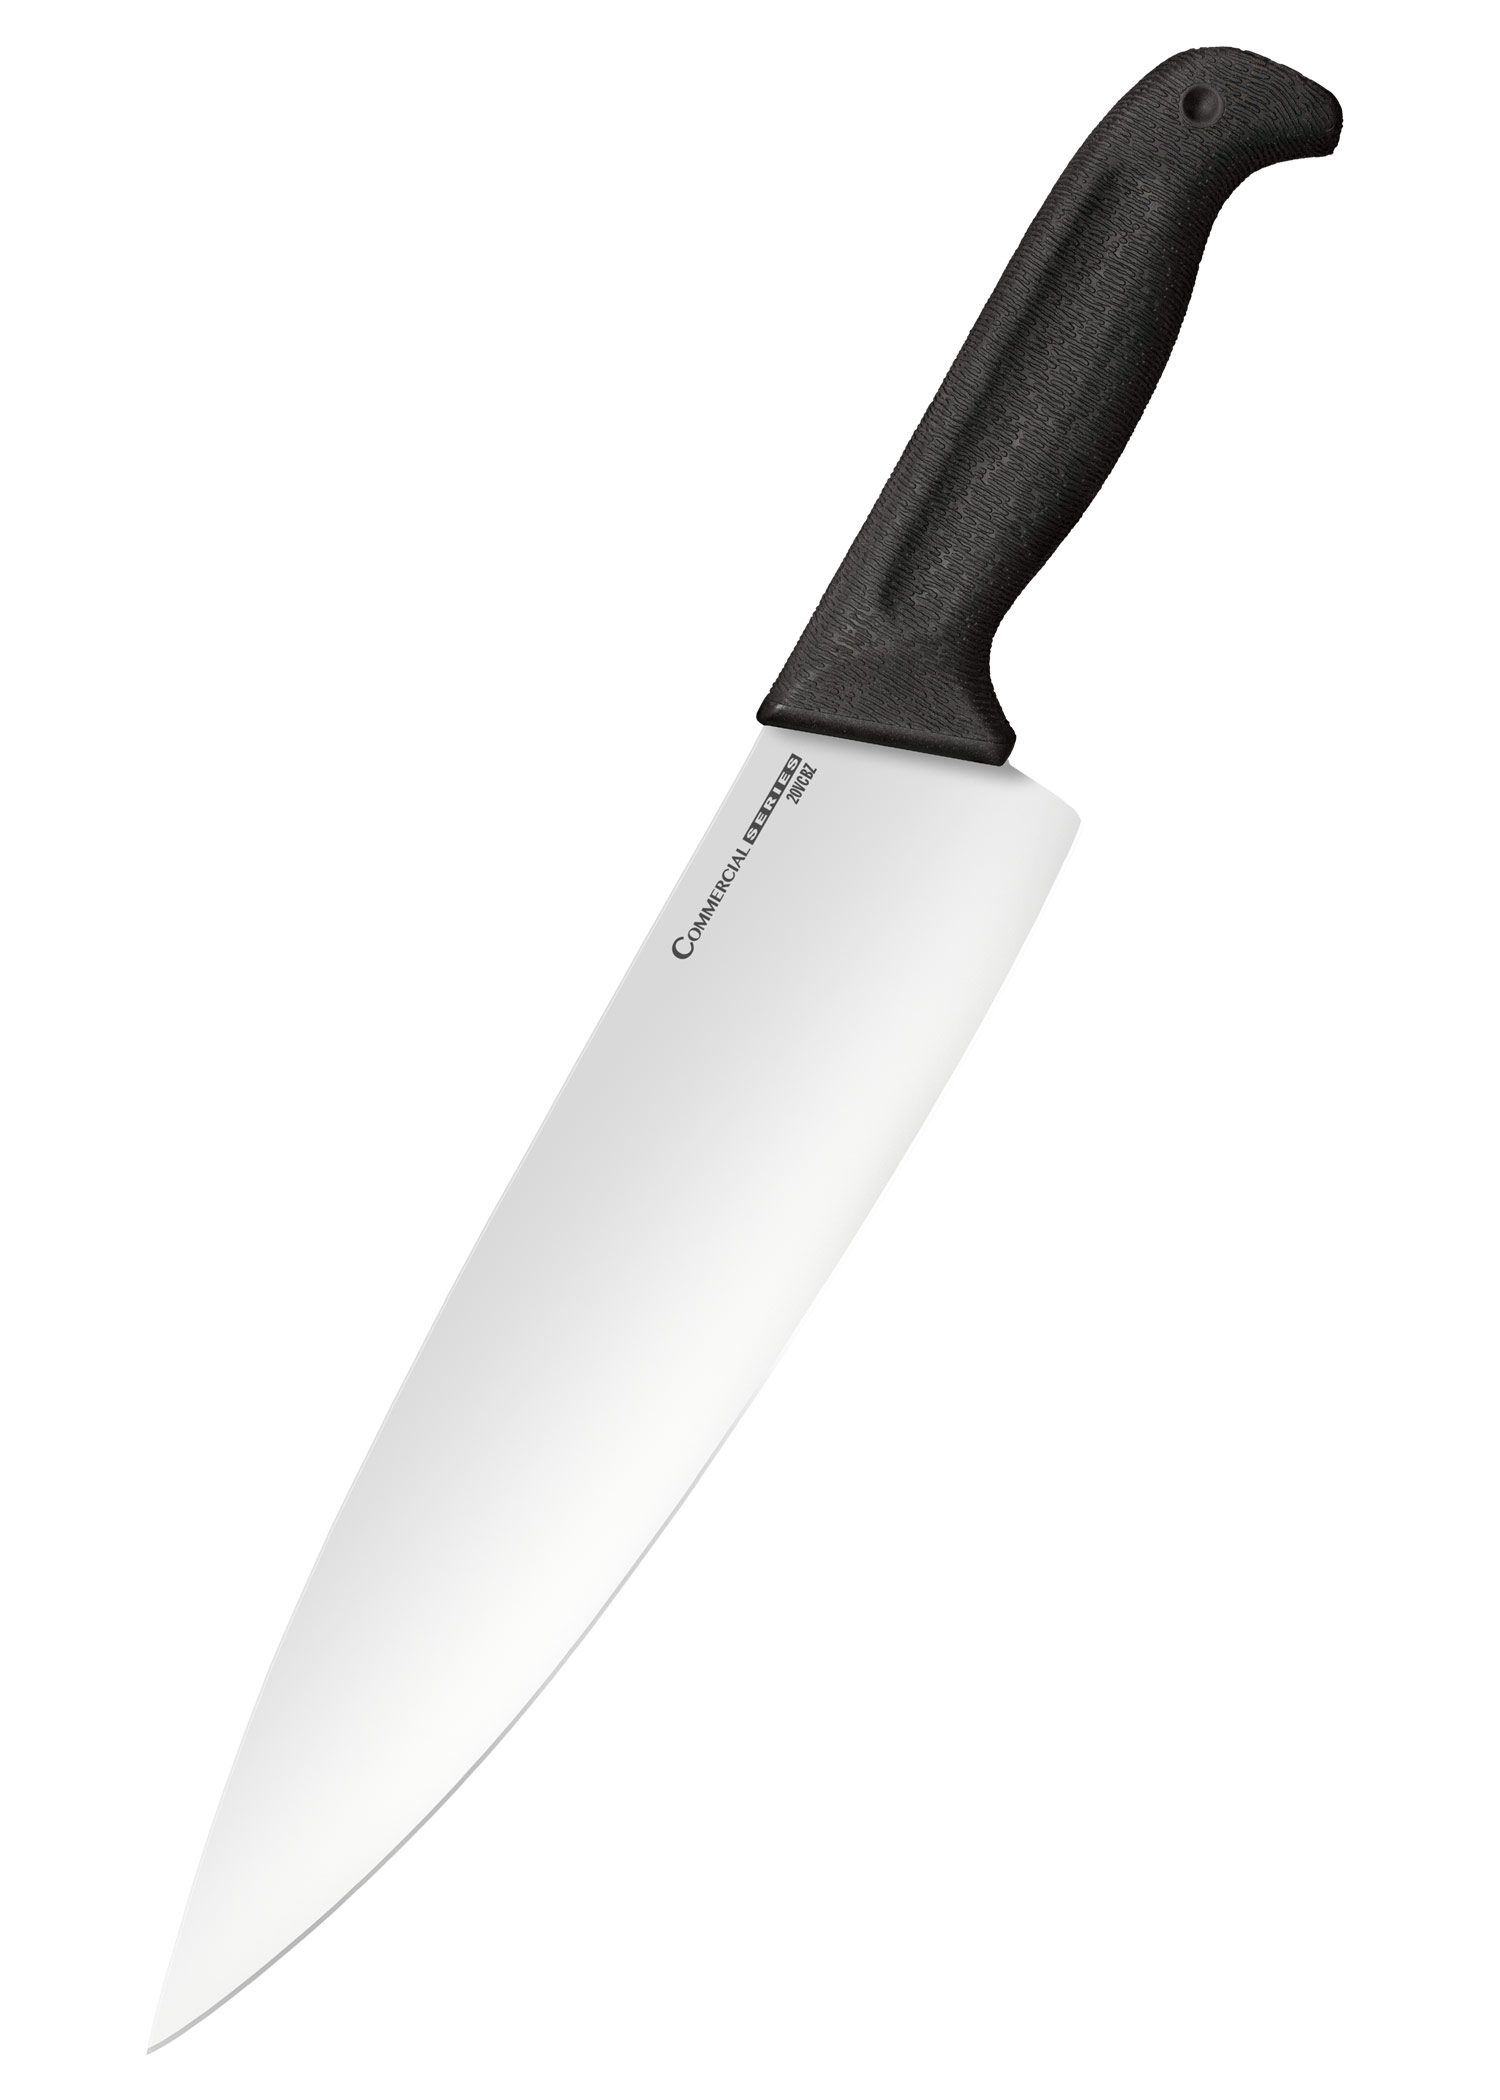 Chef's Knife, 10 in. Blade, Commercial Series, Cold Steel, 20VCBZ